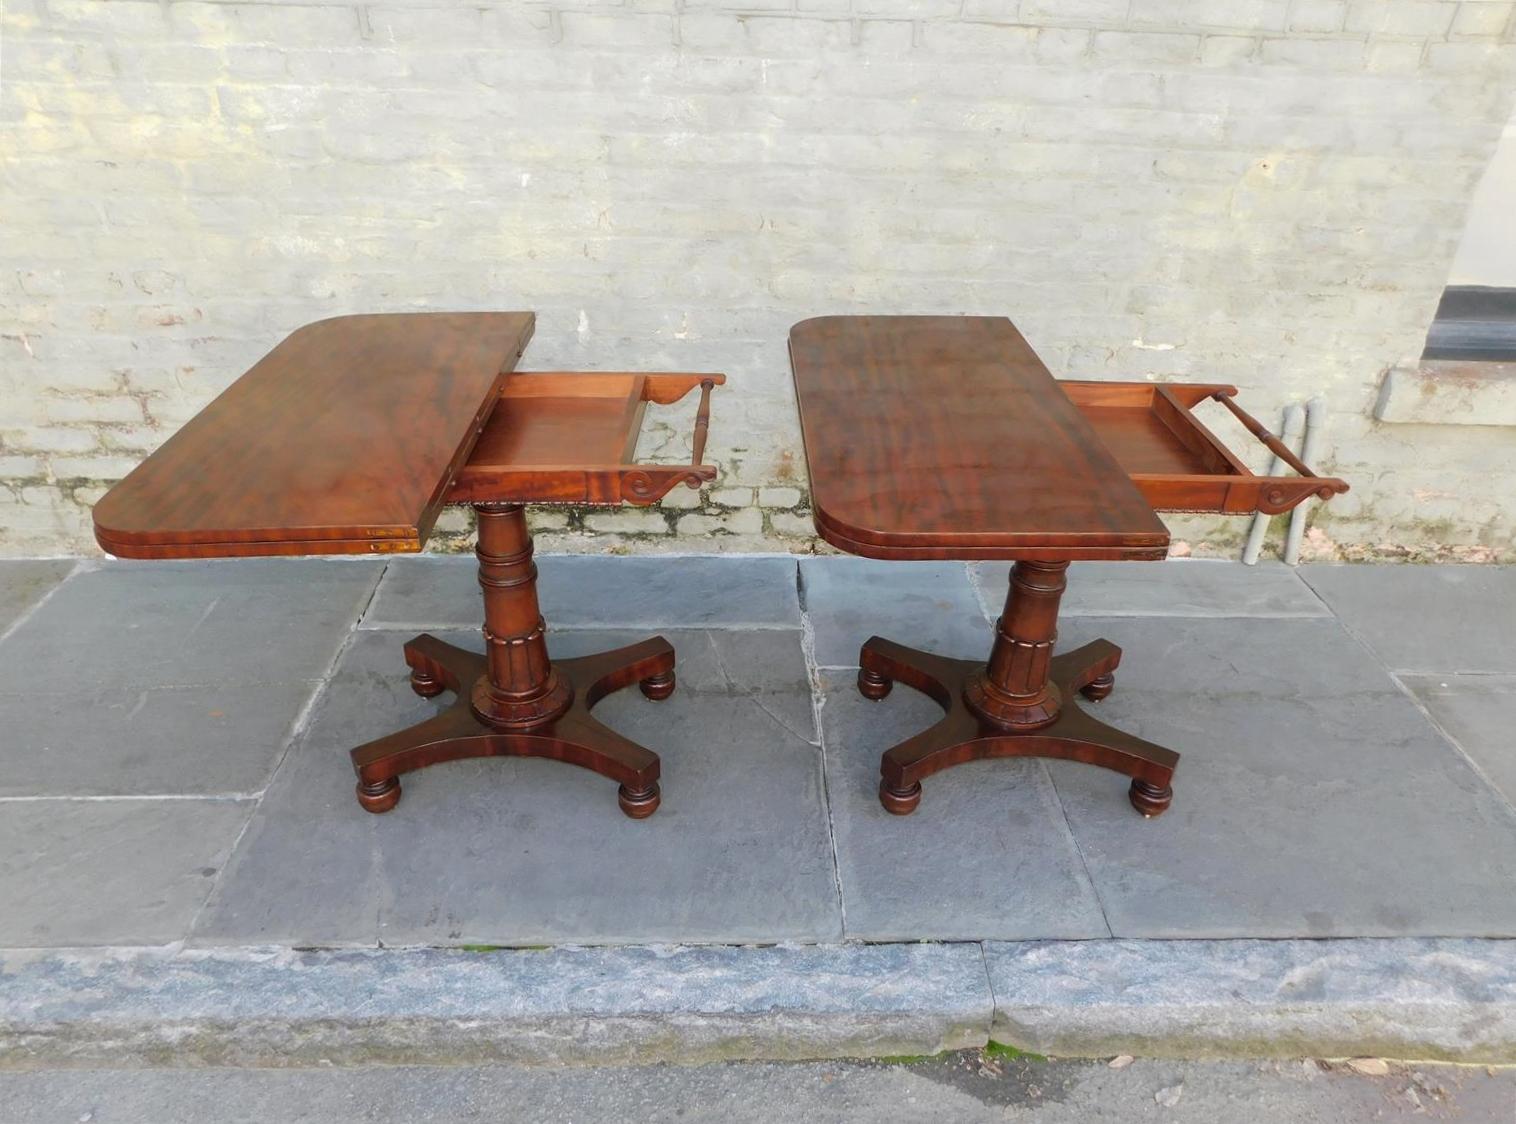 Pair of English Mahogany Pedestal Hinged Game Tables on Brass Casters, C. 1820 For Sale 3